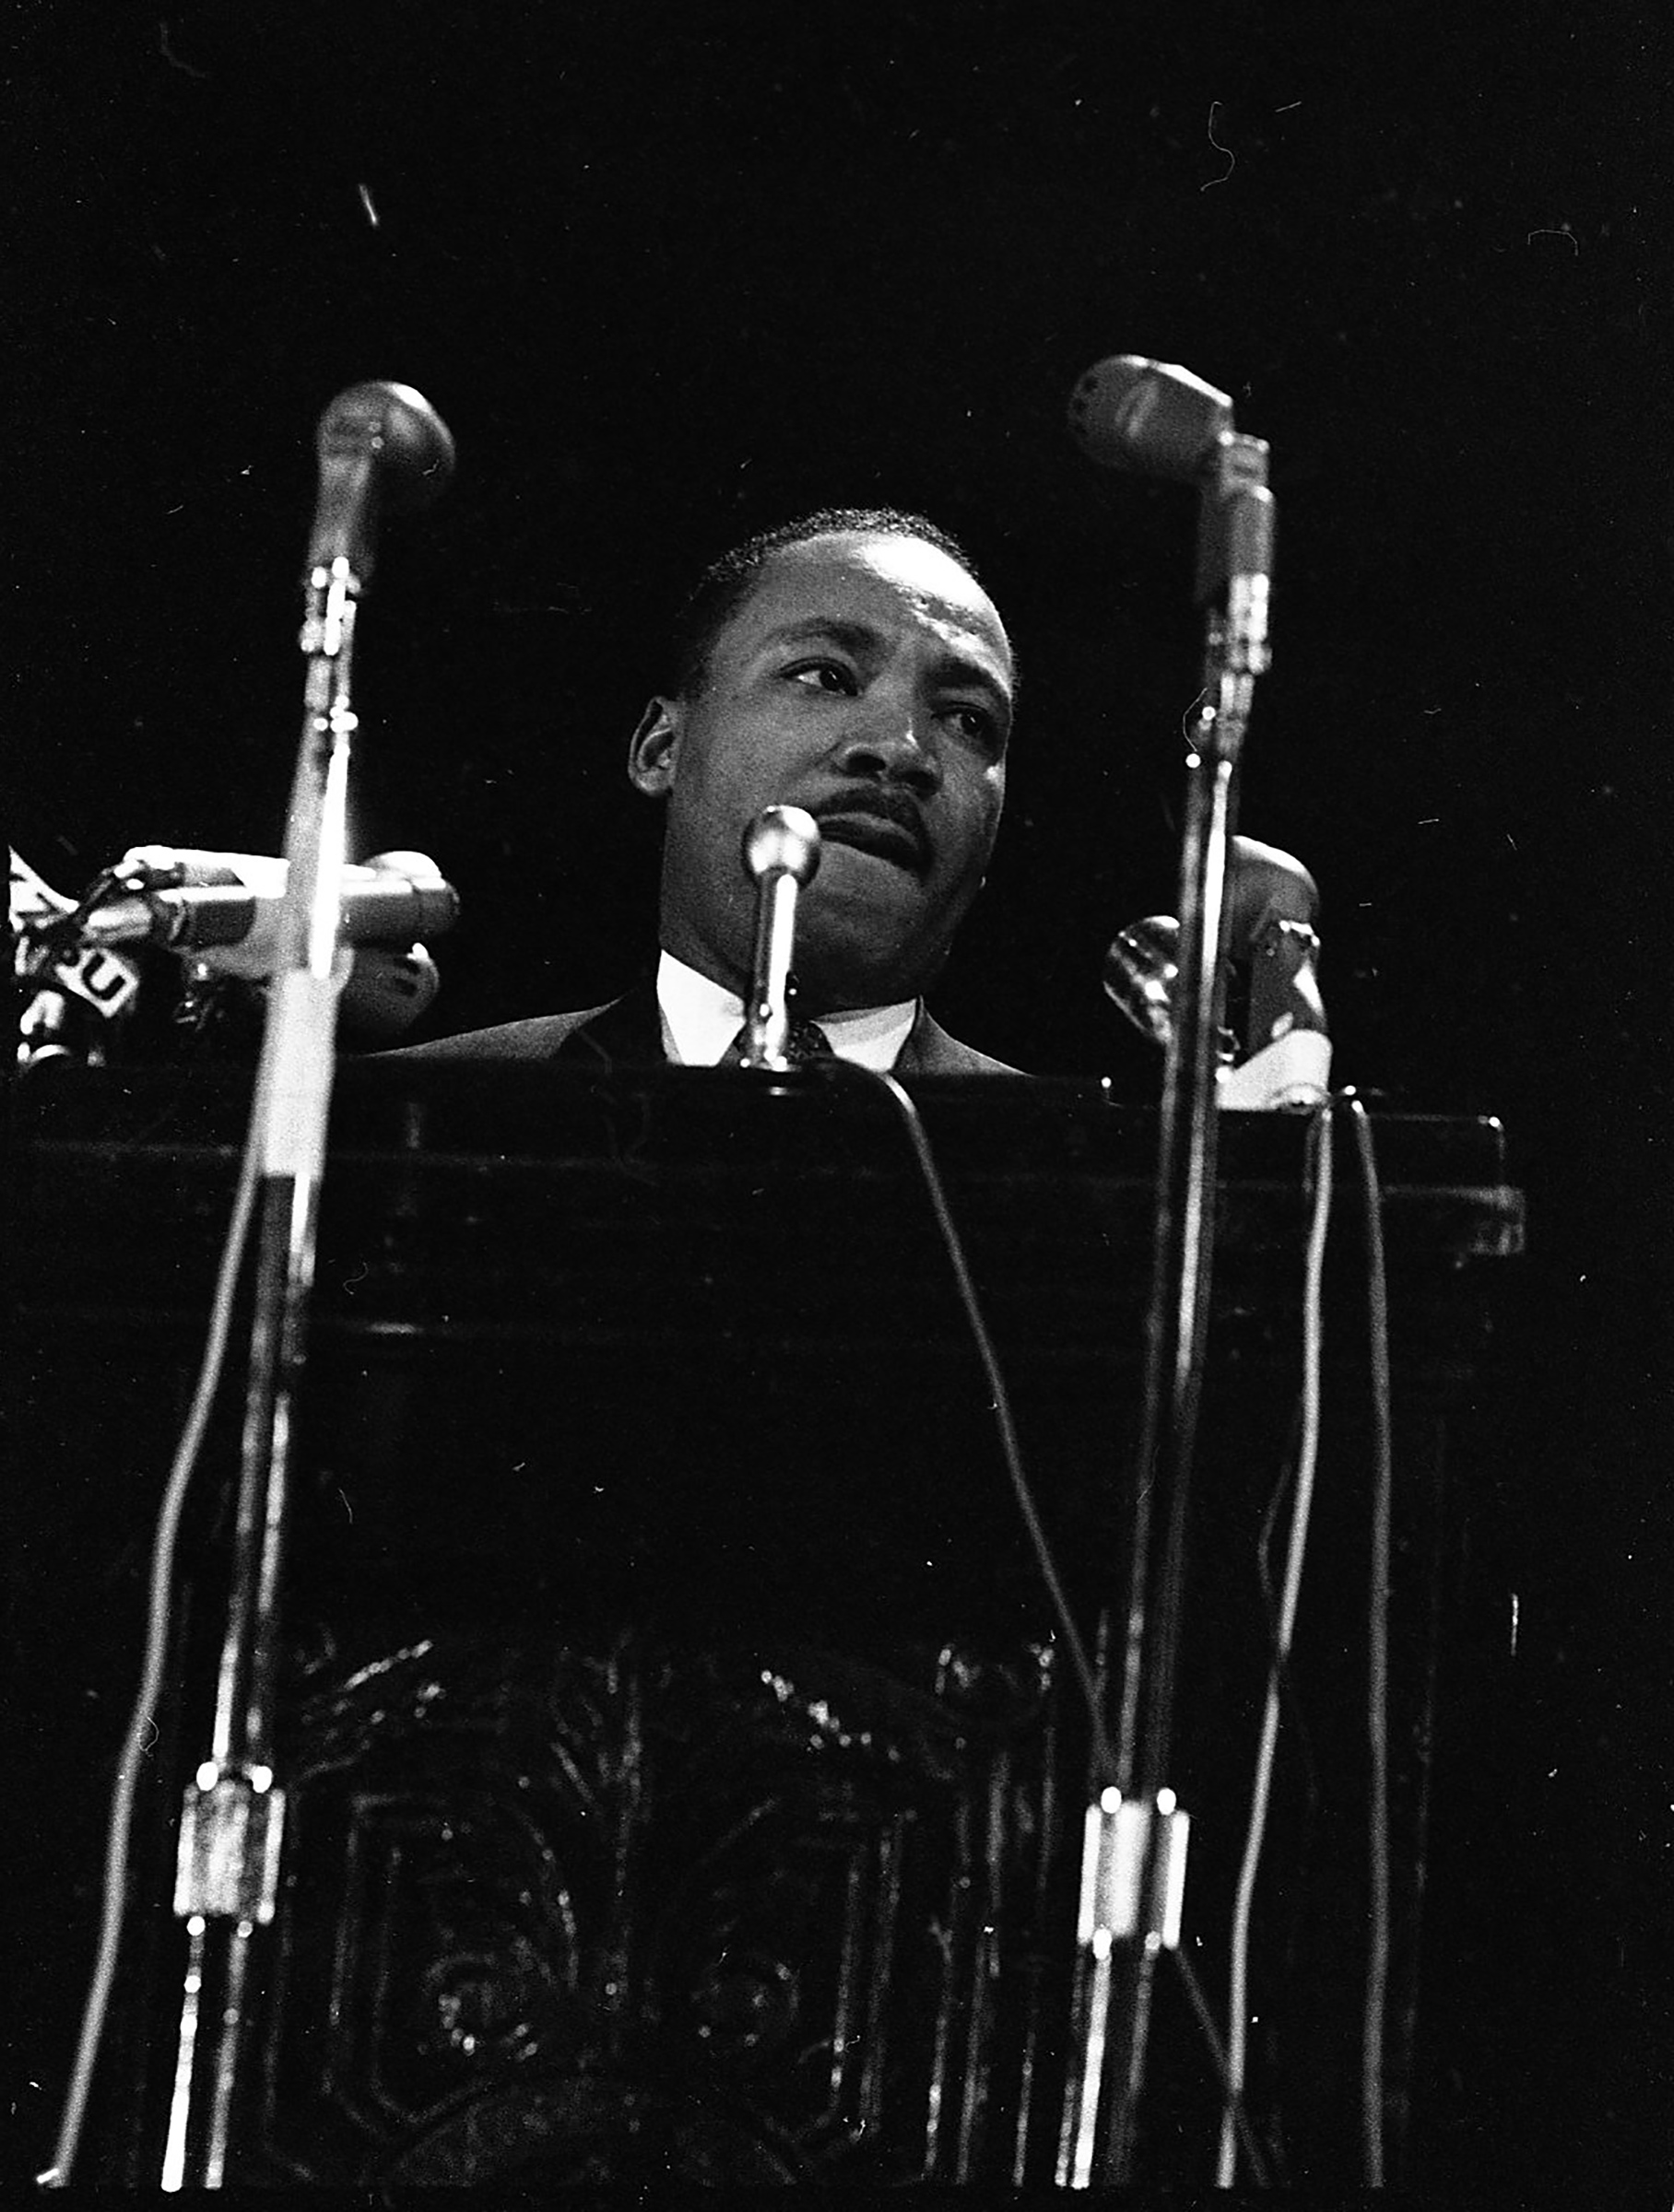 Dr. Martin Luther King Jr. delivers his "The Other America" speech at Stanford University in California, on April 14, 1967.